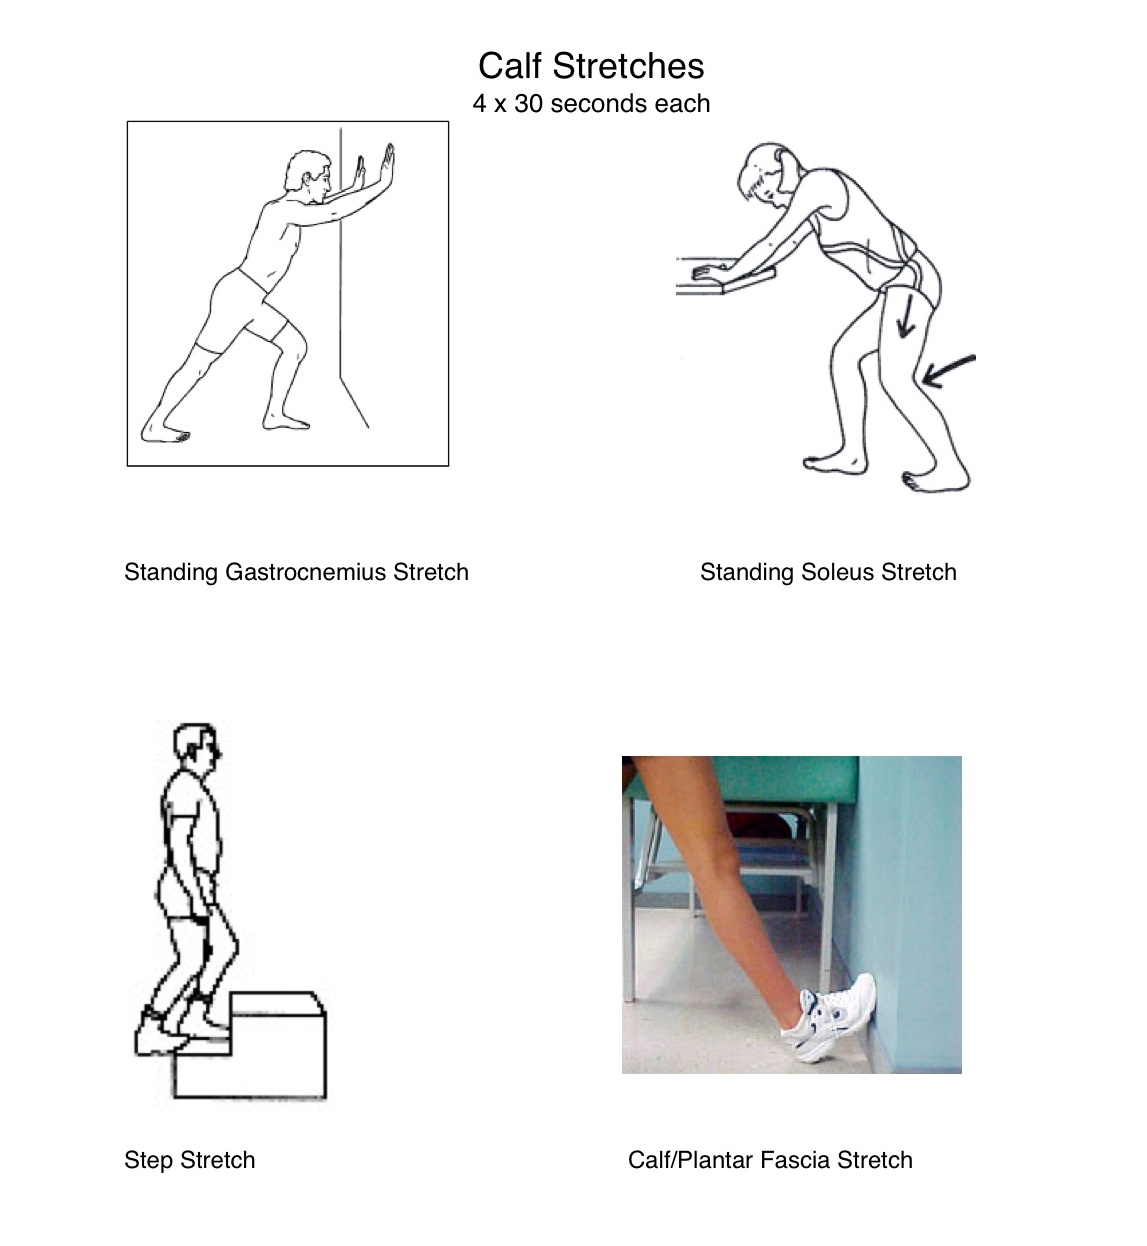 Health, Fitness, Performance... and life.: Calf Stretches